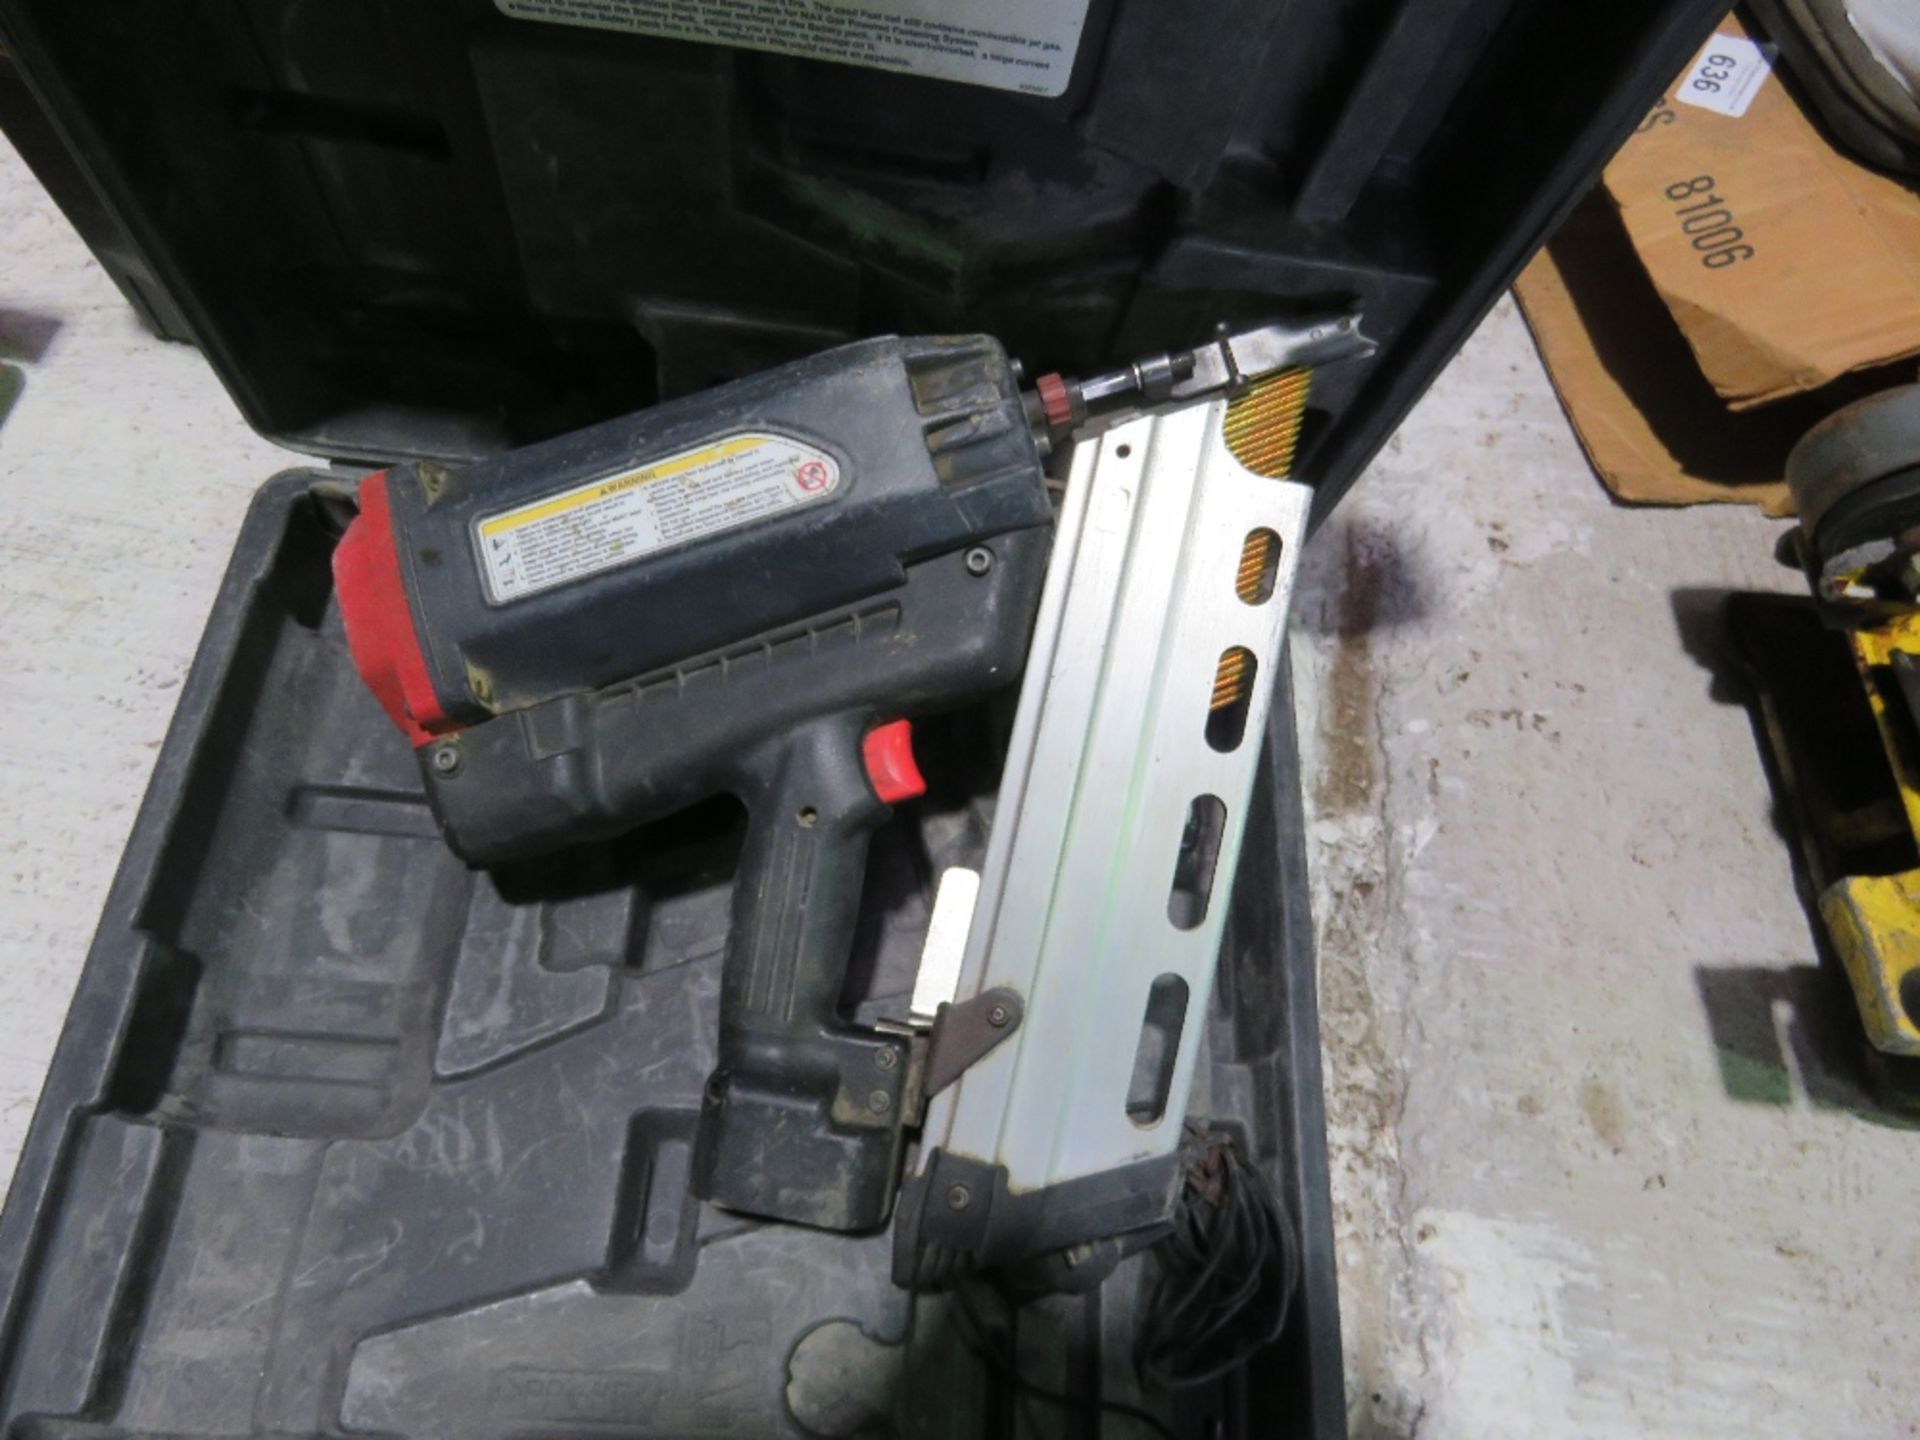 MAXPOWER NAIL GUN IN A CASE. ....THIS LOT IS SOLD UNDER THE AUCTIONEERS MARGIN SCHEME, THEREFORE NO - Image 2 of 3